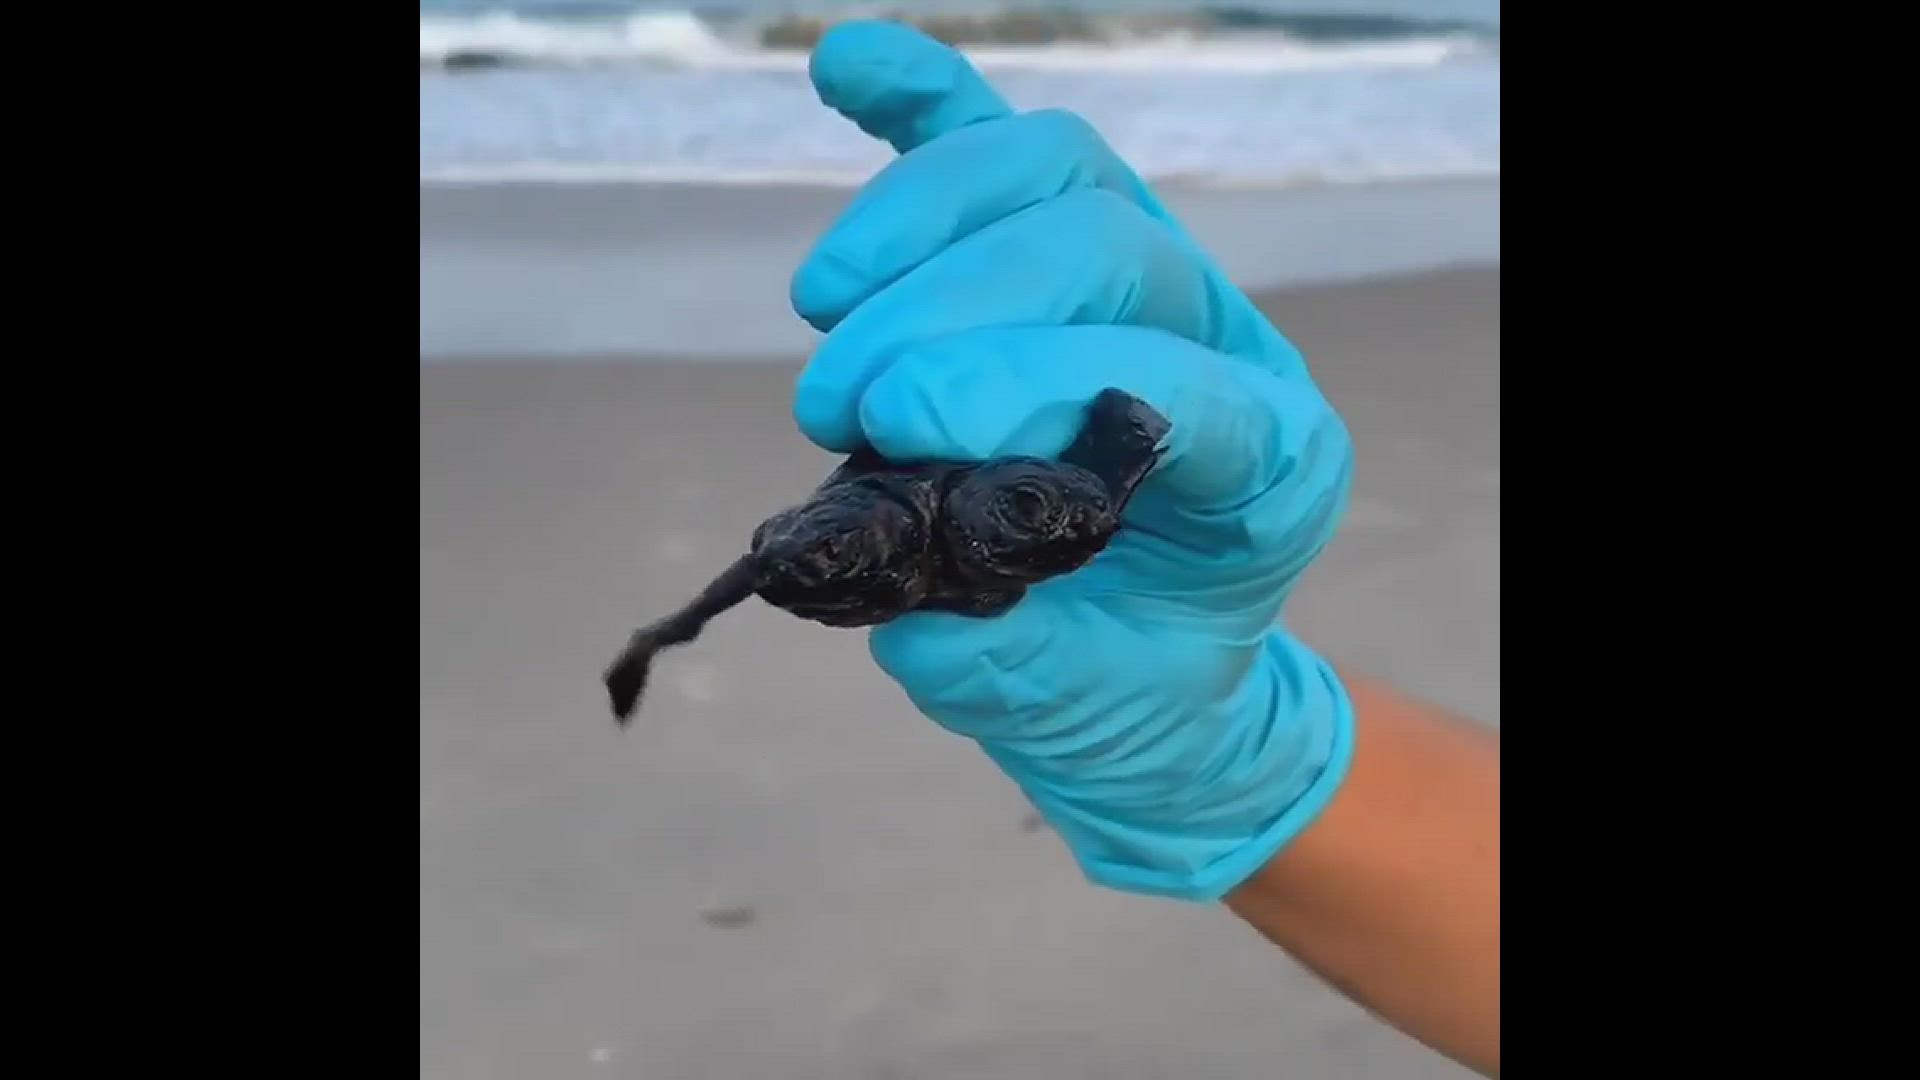 Biologists with the National Park Service found at two-headed sea turtle on Cape Hatteras National Seashore on the Outer Banks of North Carolina.